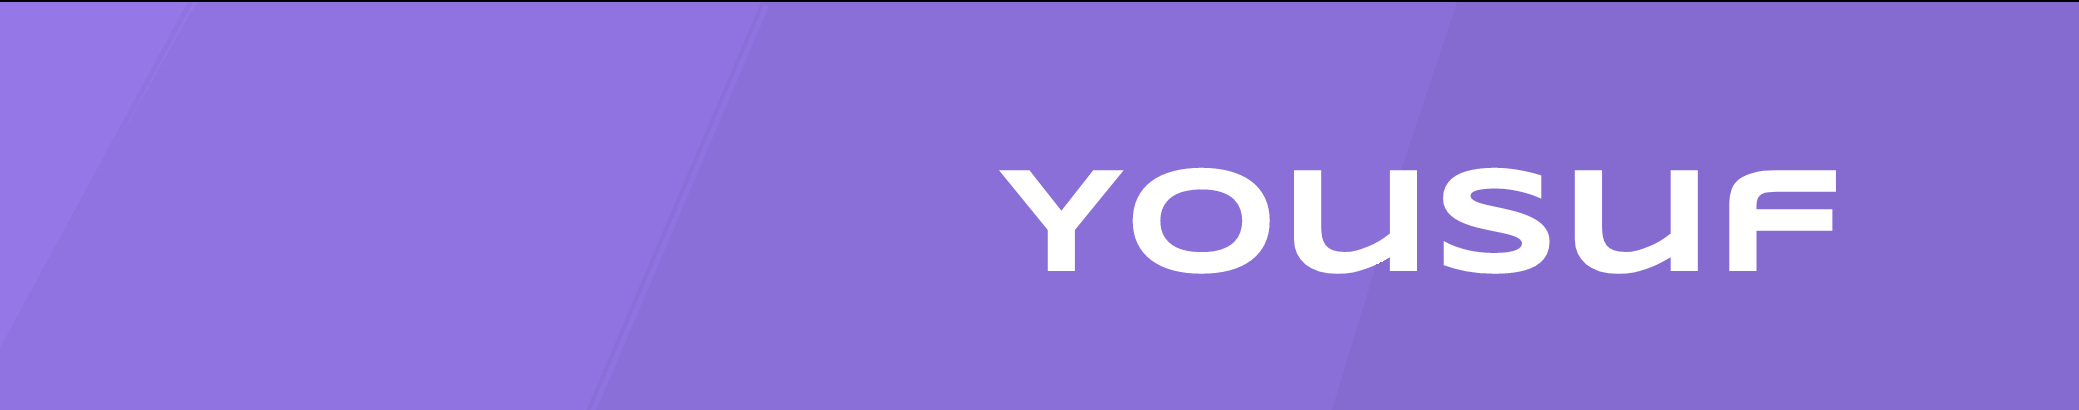 Yousuf Builds's profile banner